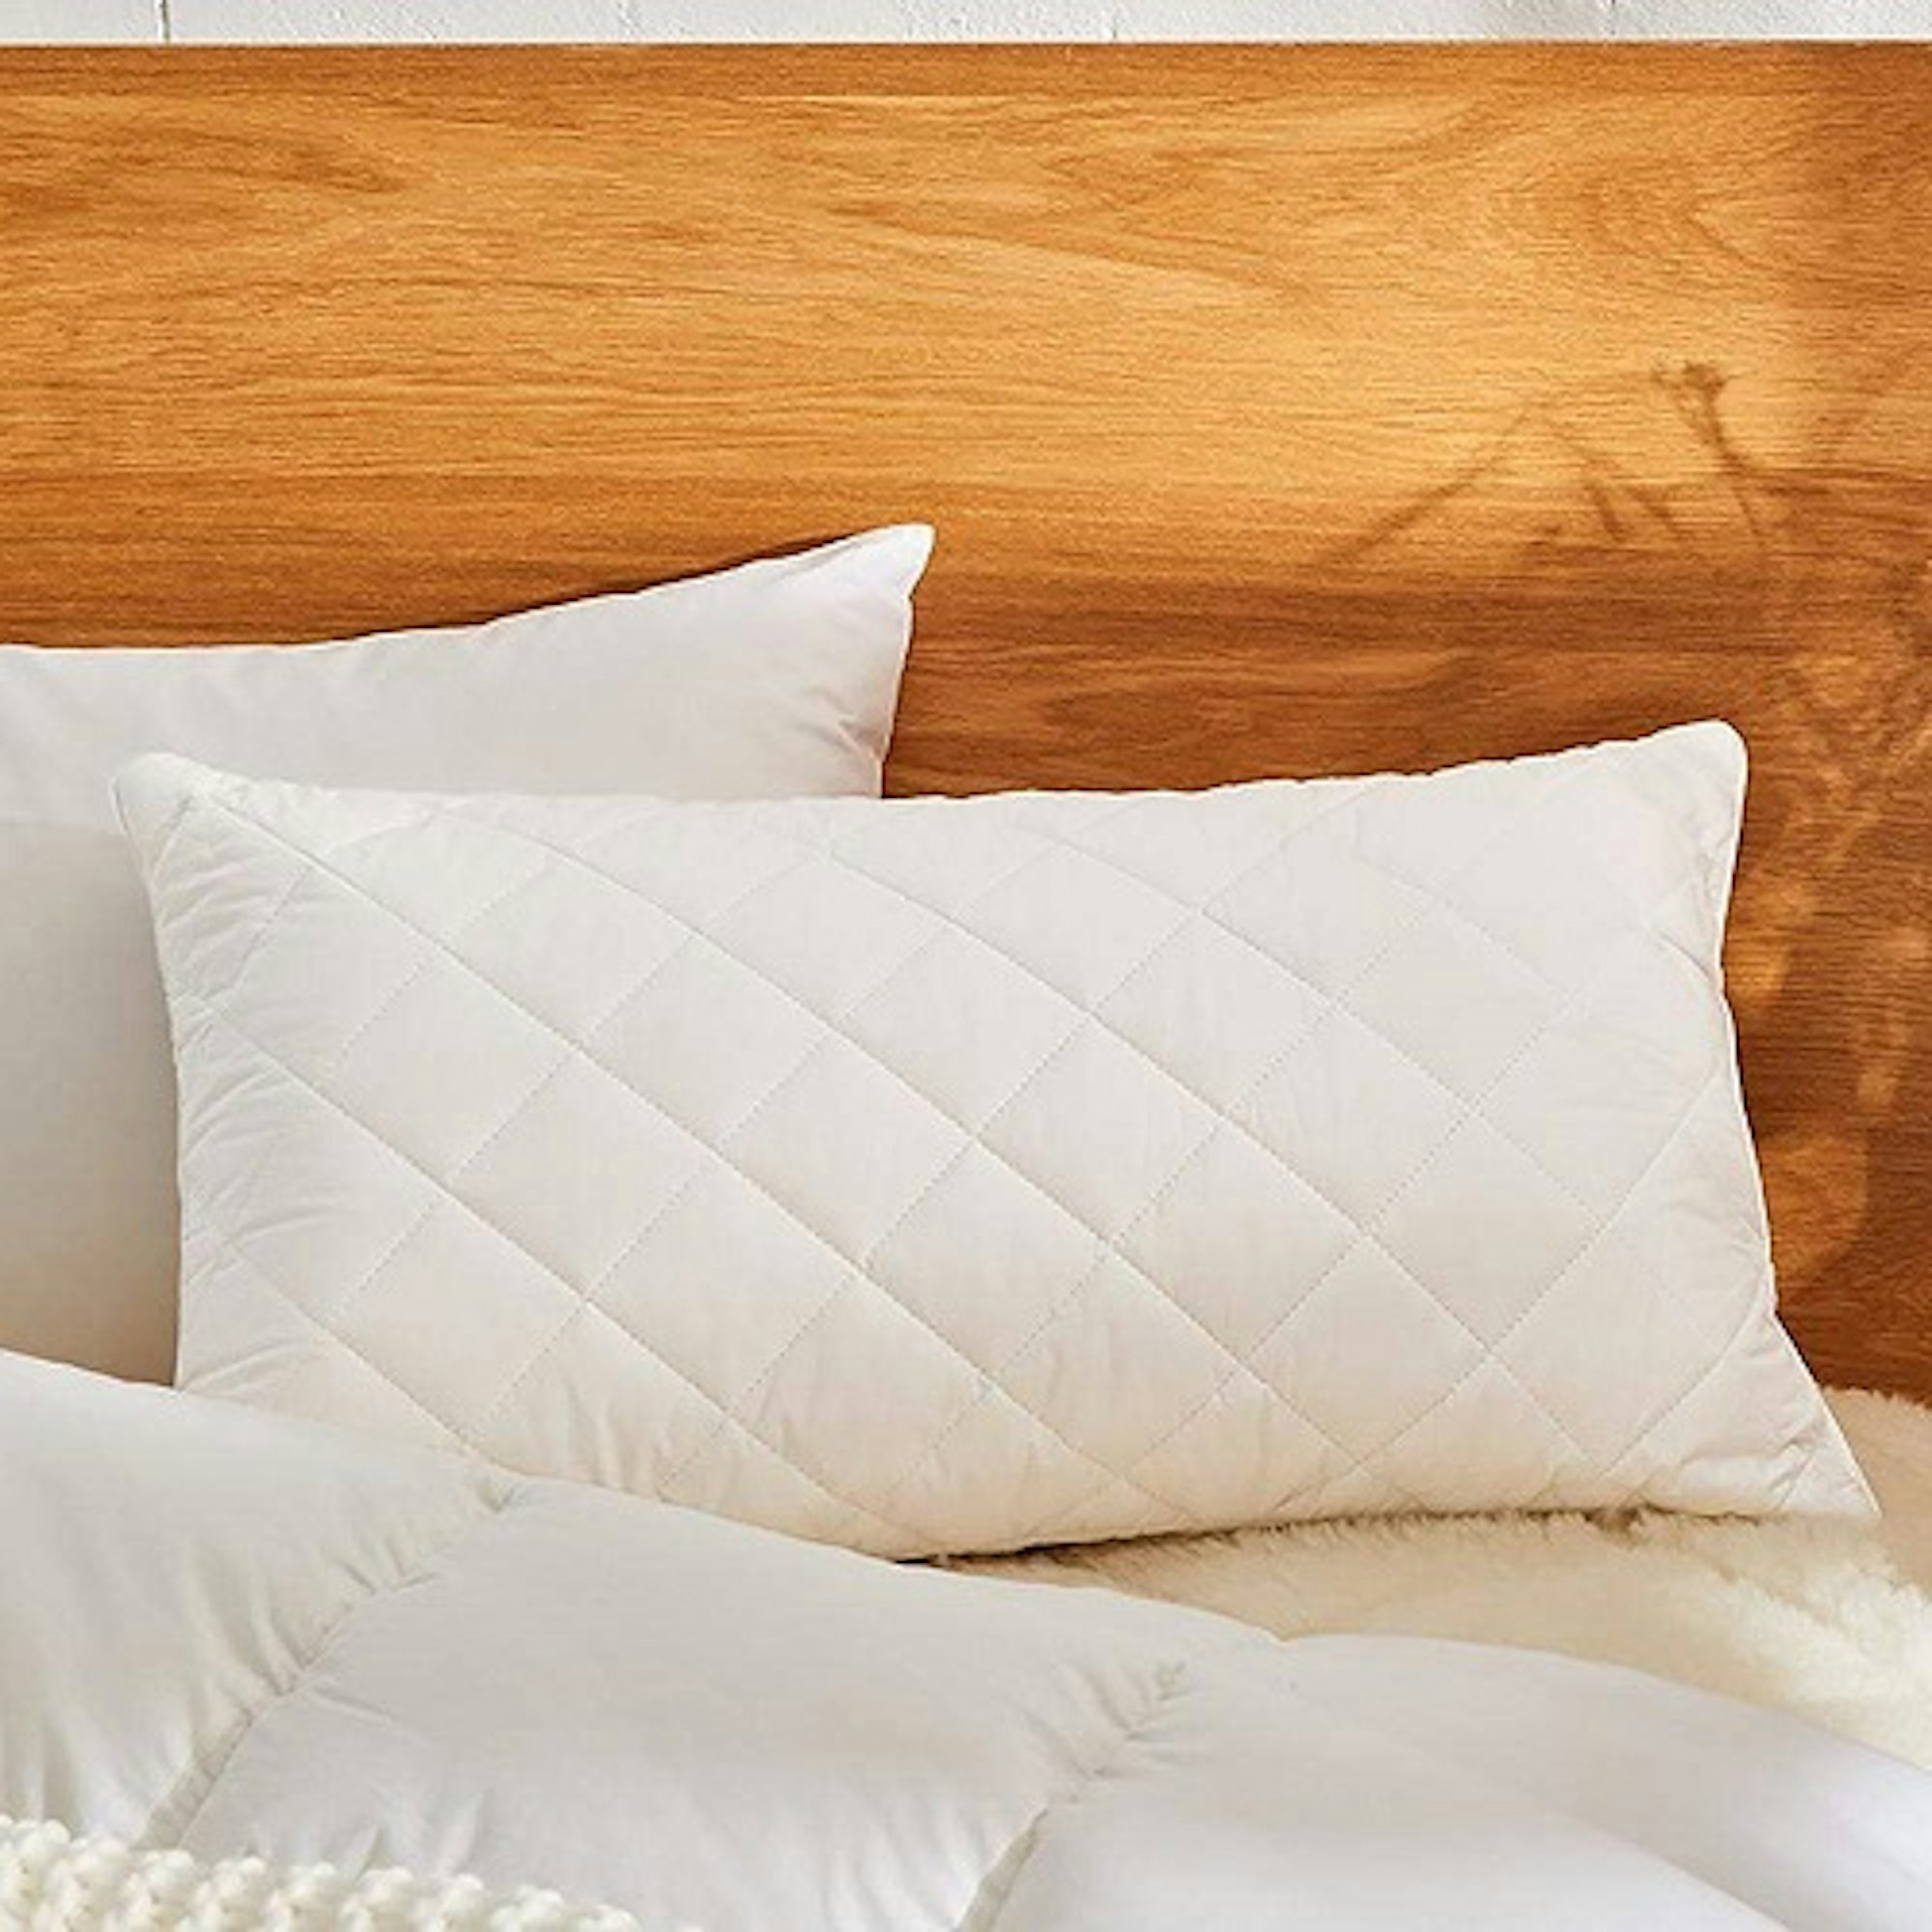 Pillow stack with wooden headboard